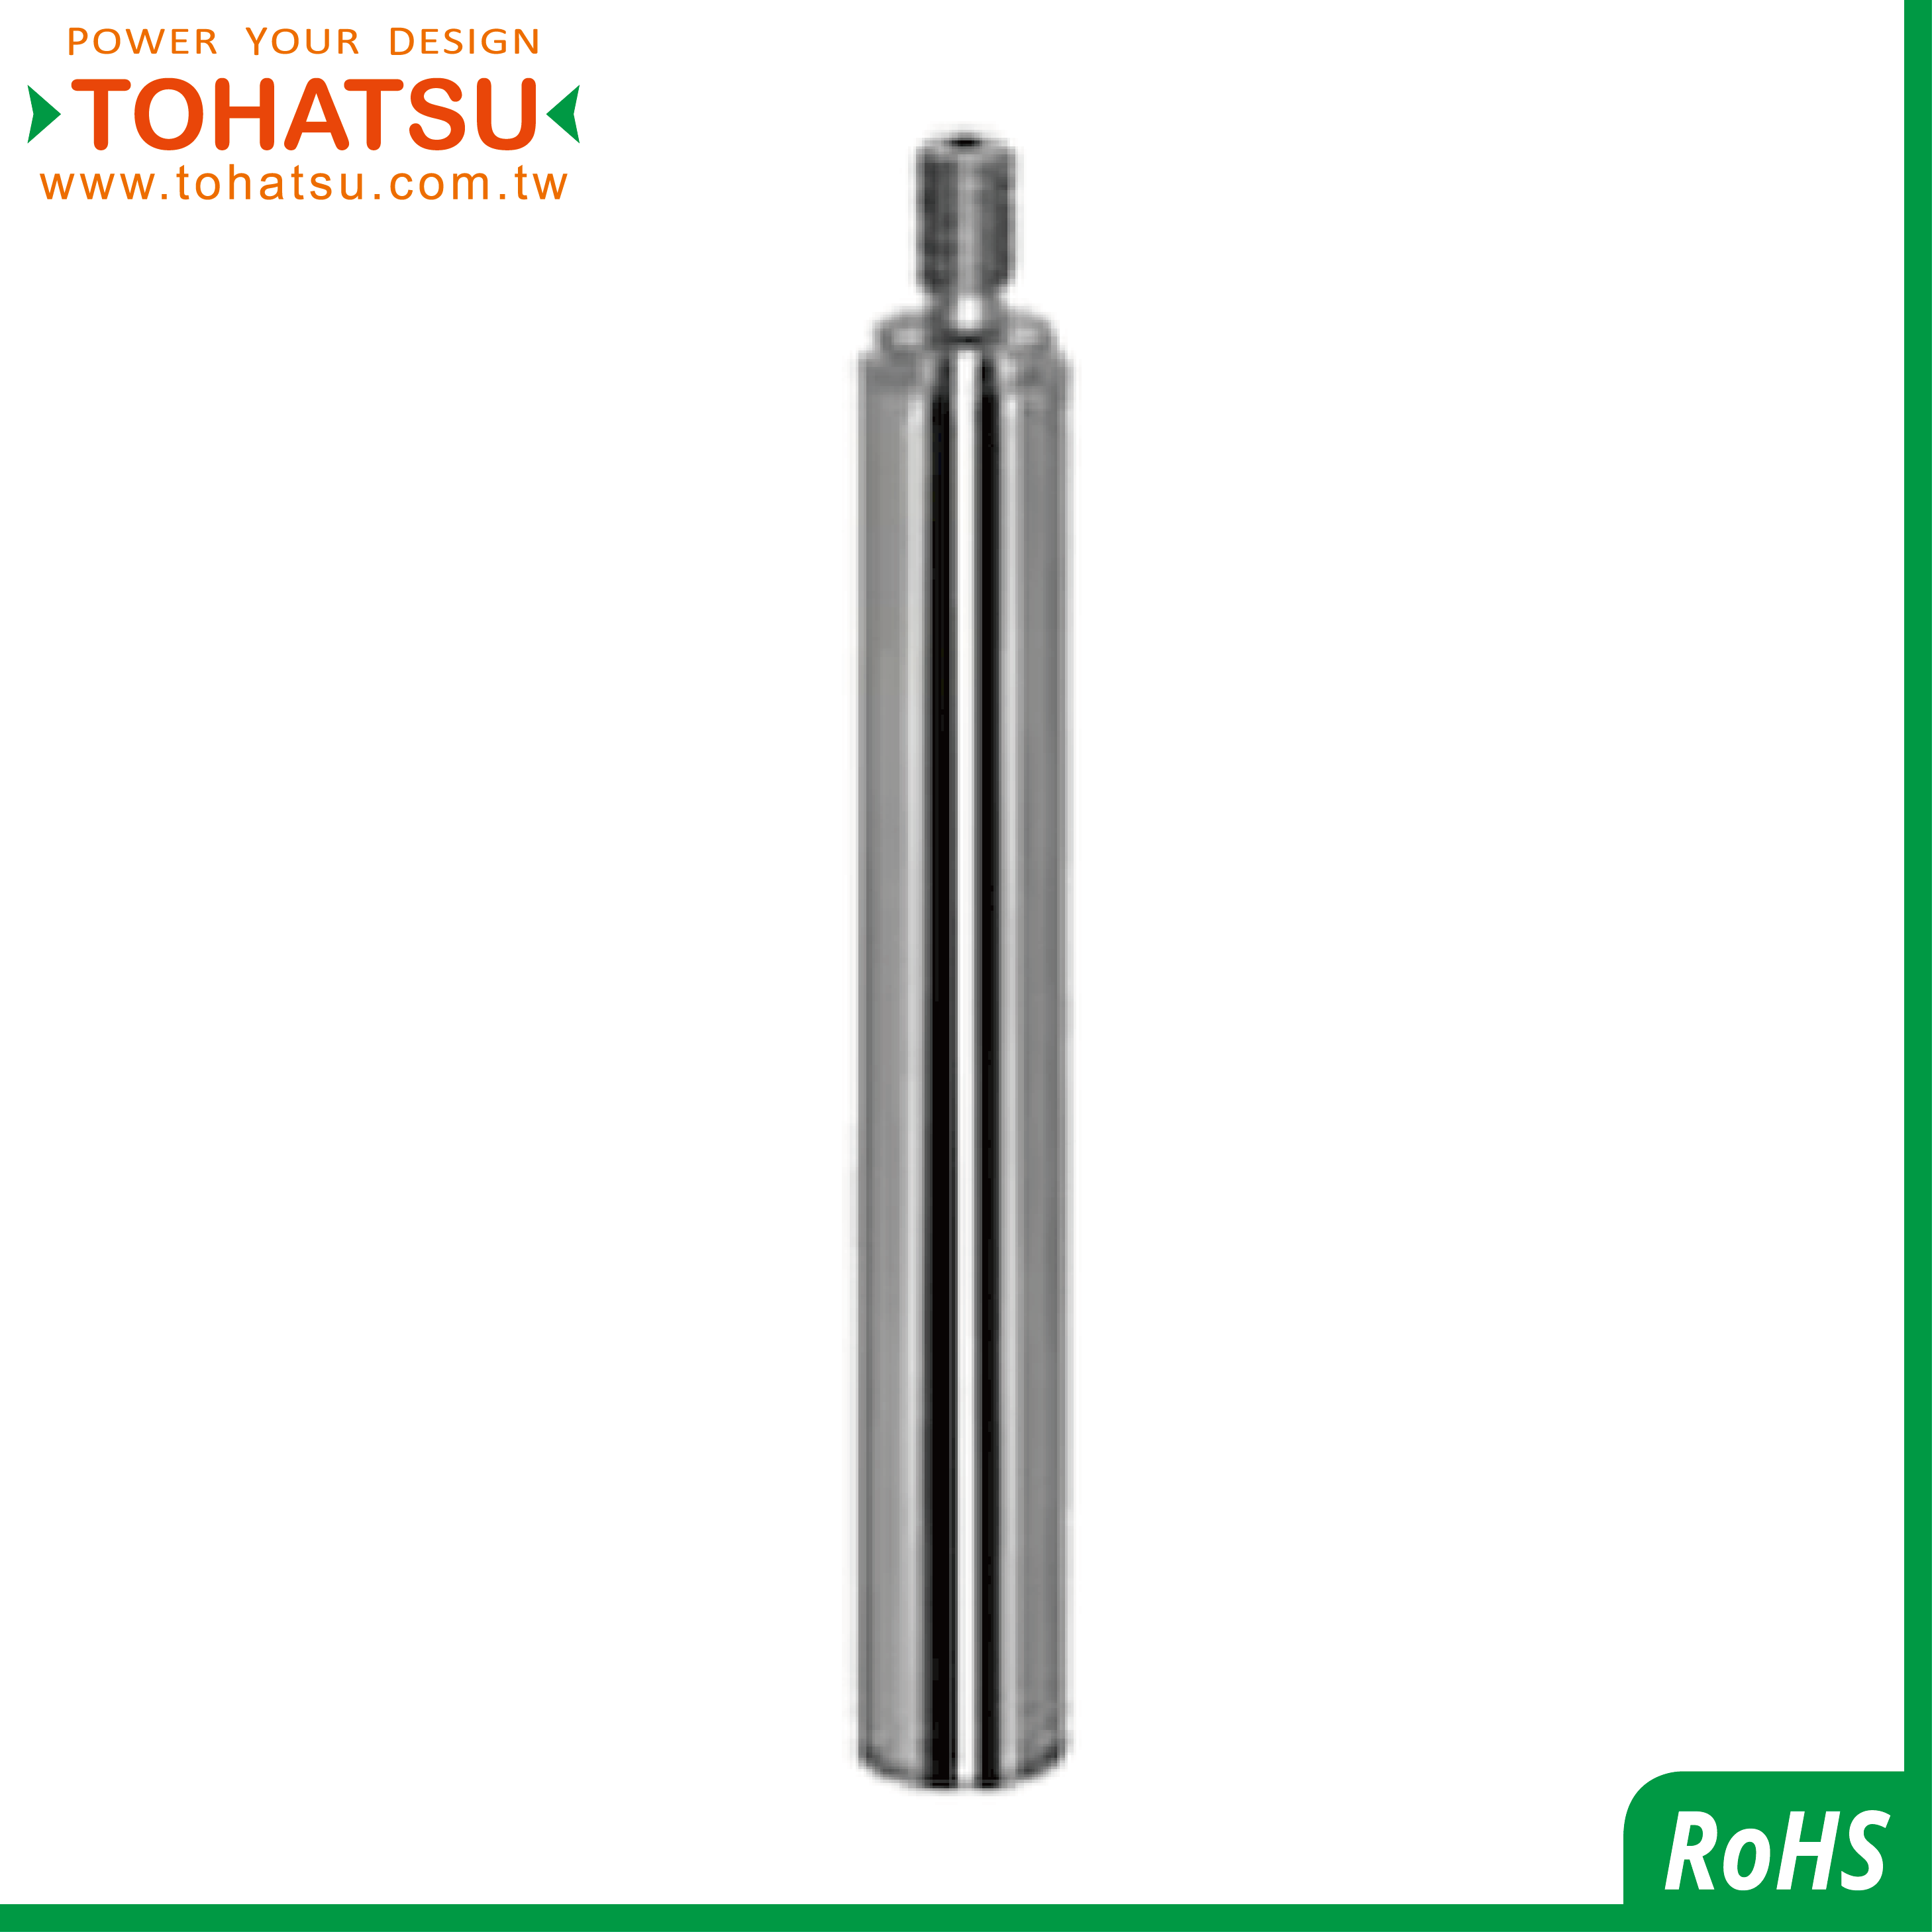 Precision Linear Shafts (One End Stepped and Male Thread)